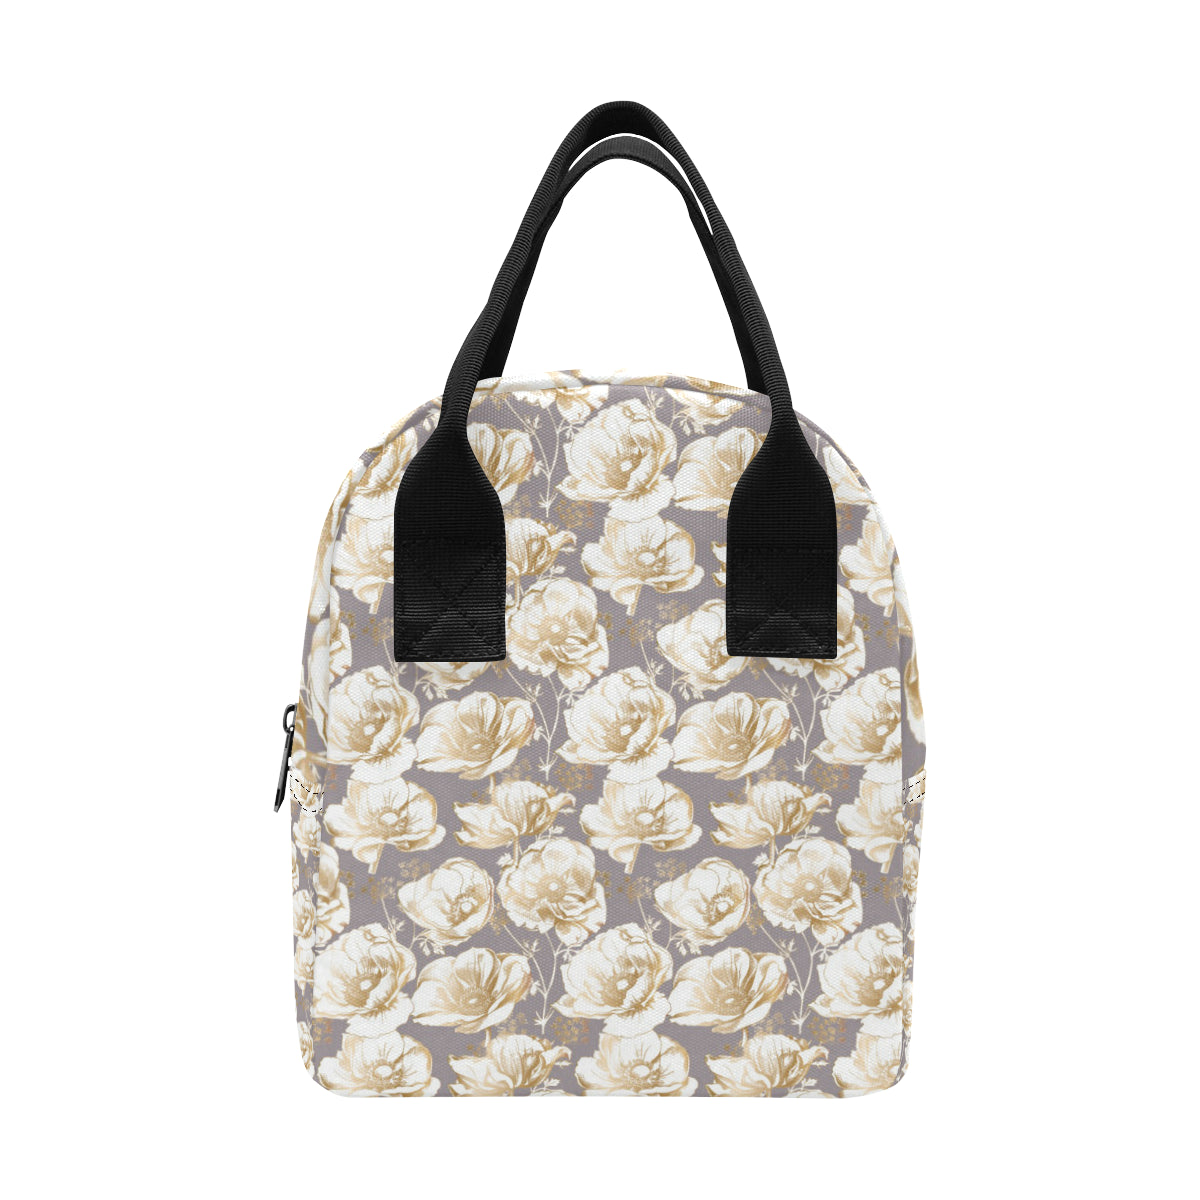 Anemone Pattern Print Design AM05 Insulated Lunch Bag